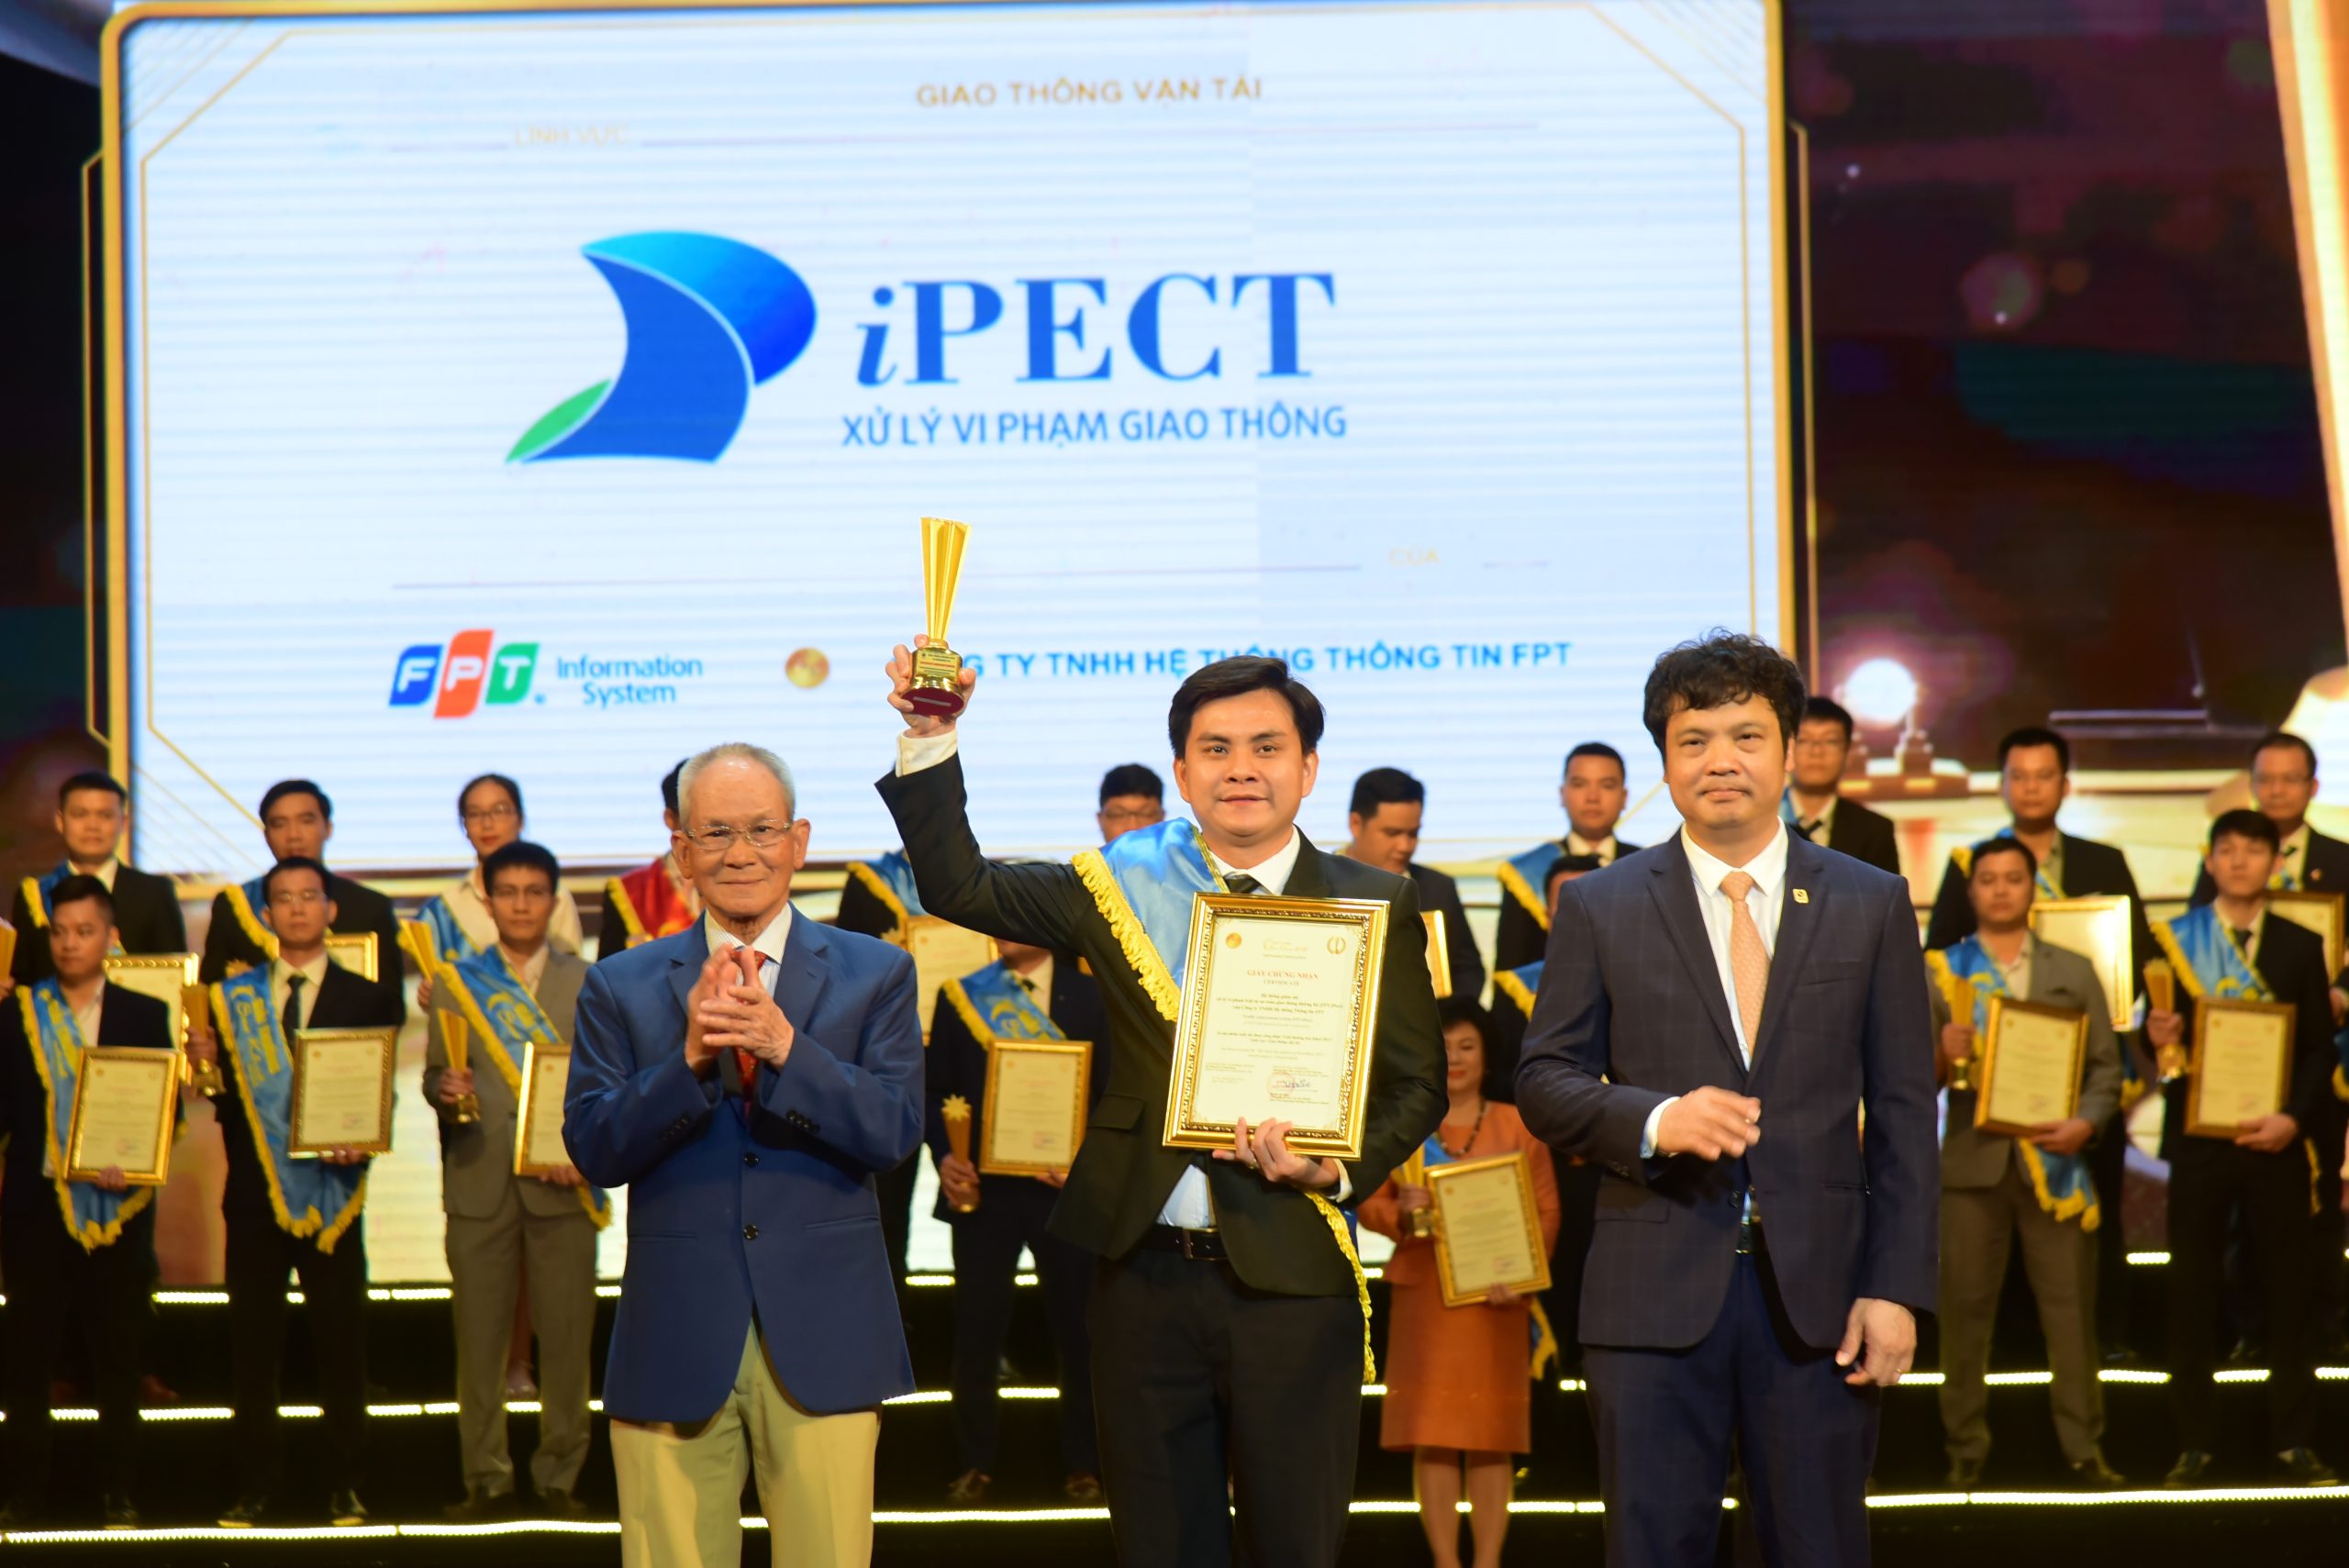 2022 Sao Khue Awards (Vietnam ICT Excellence) – Traffic Enforcement System (FPT.iPect)